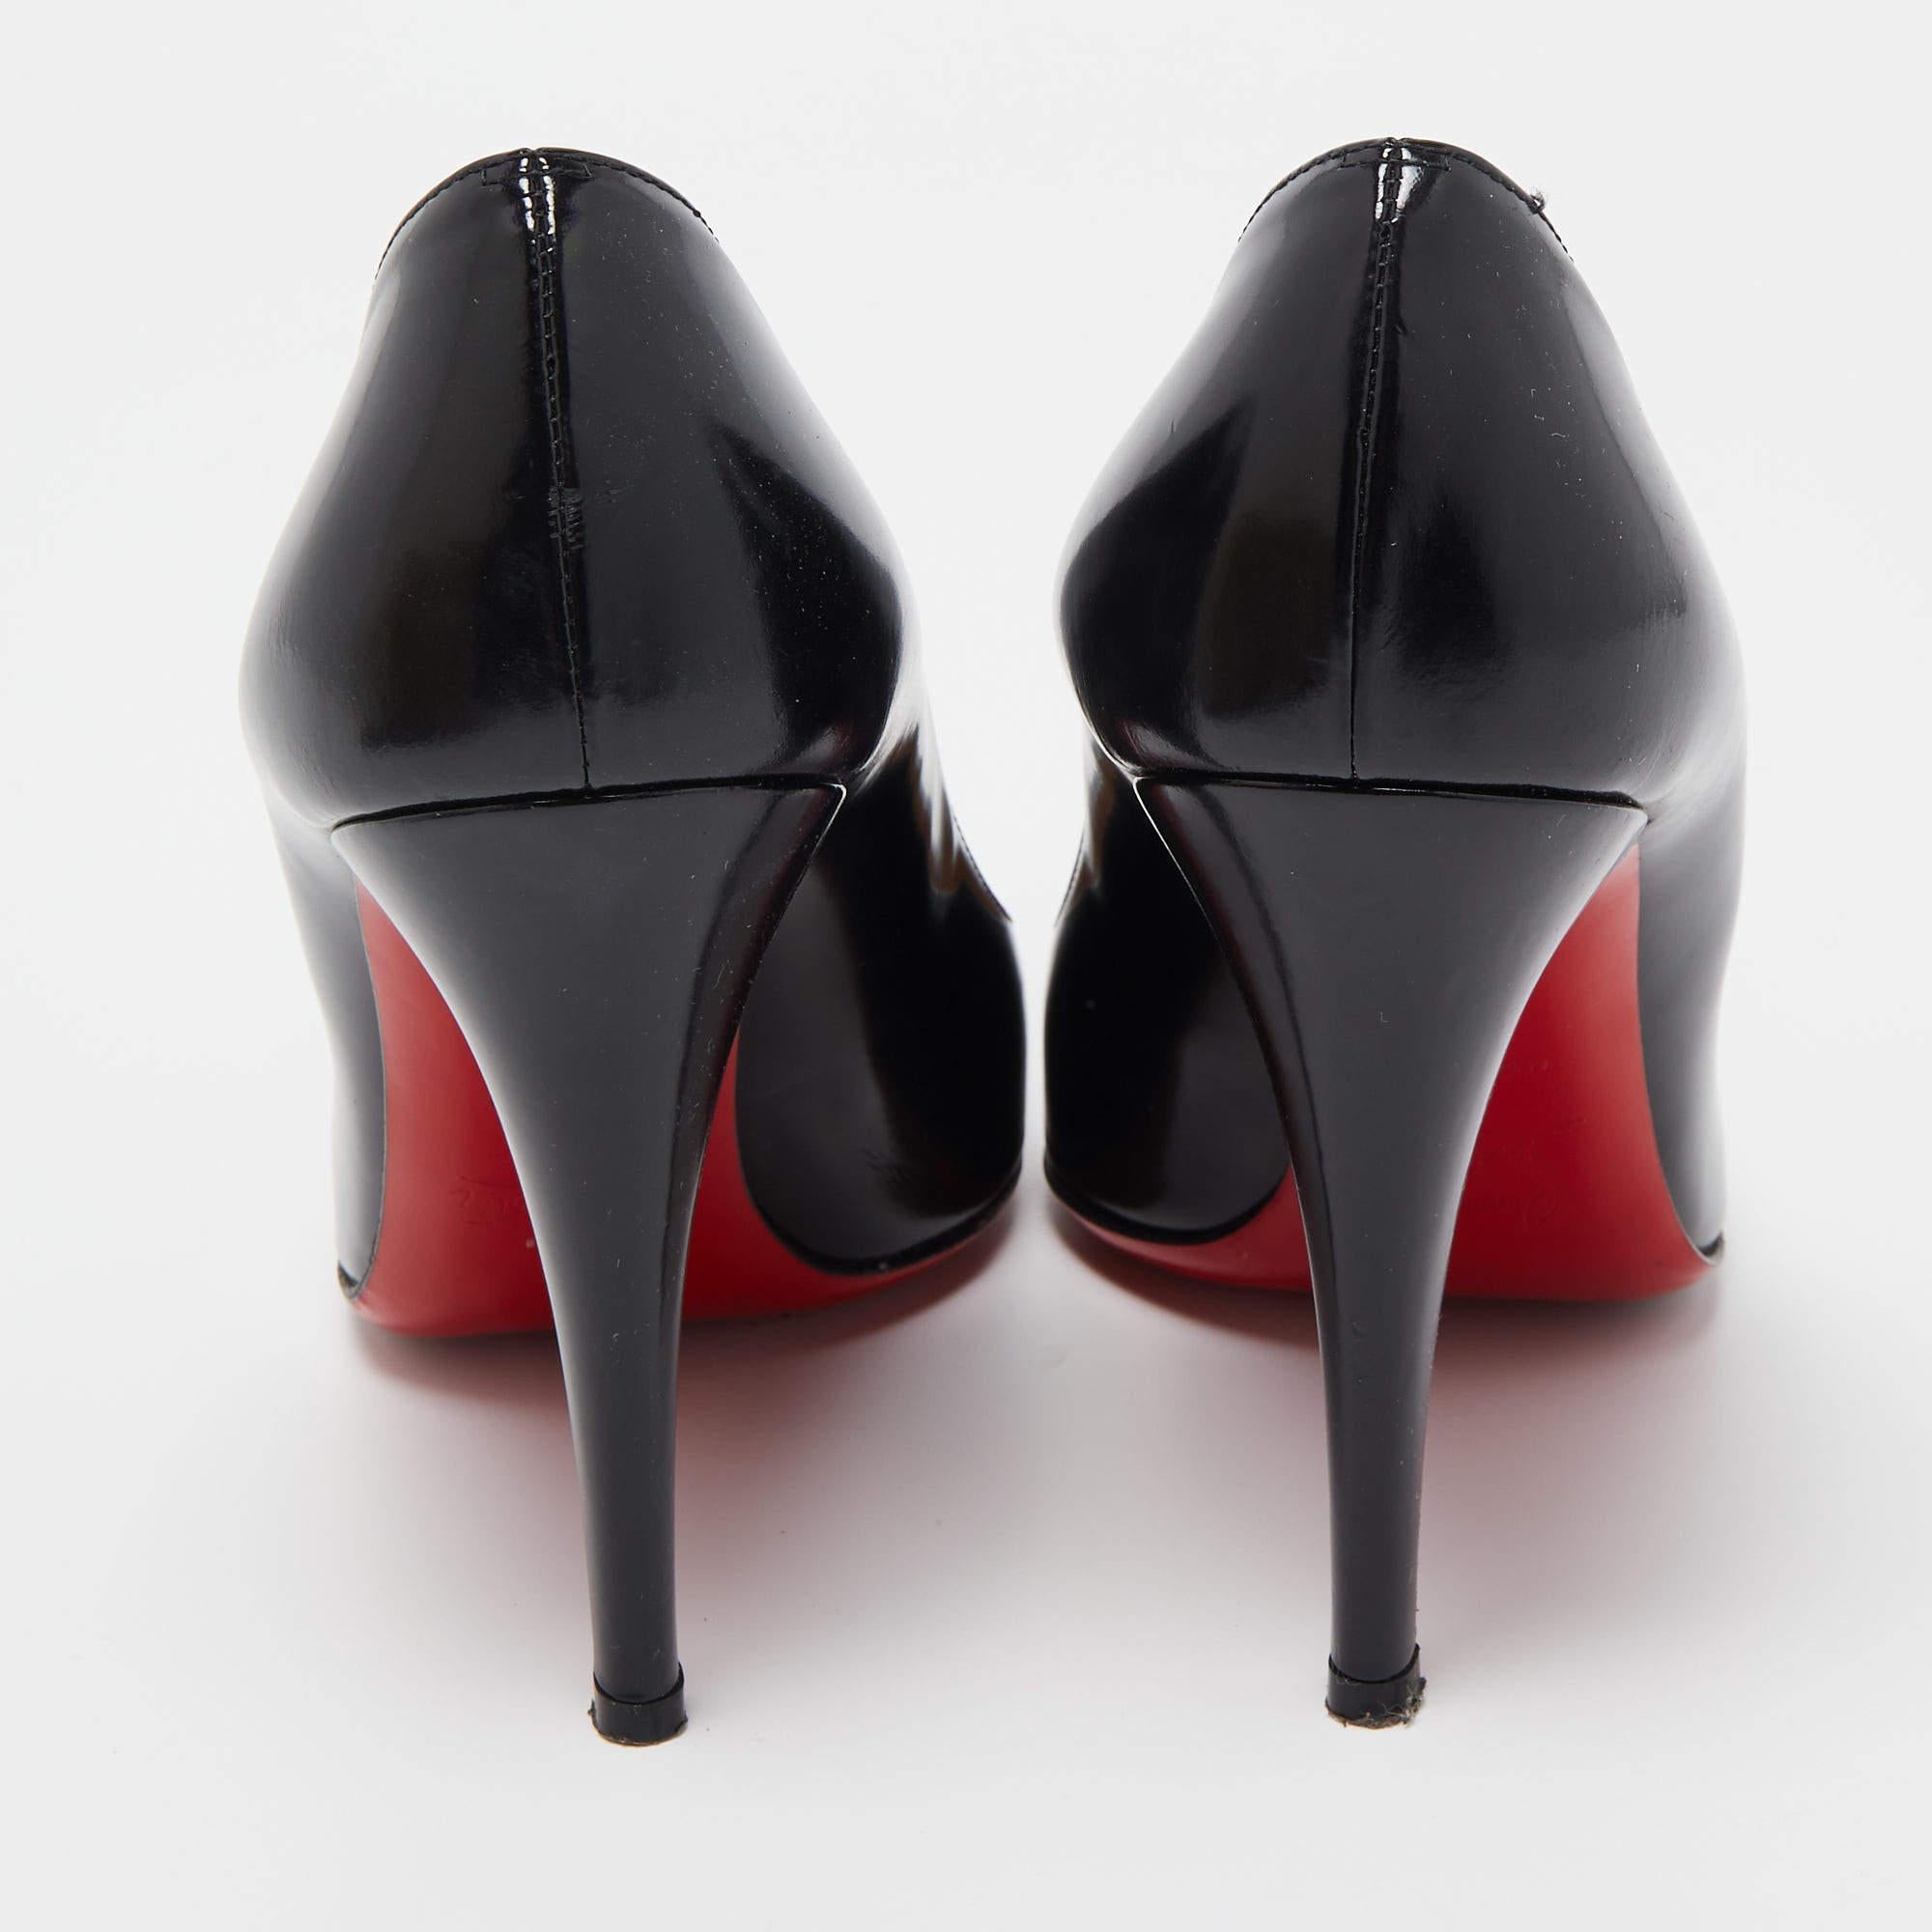 Christian Louboutin Black Leather Simple Pointed Toe Pumps Size 39.5 In Good Condition For Sale In Dubai, Al Qouz 2